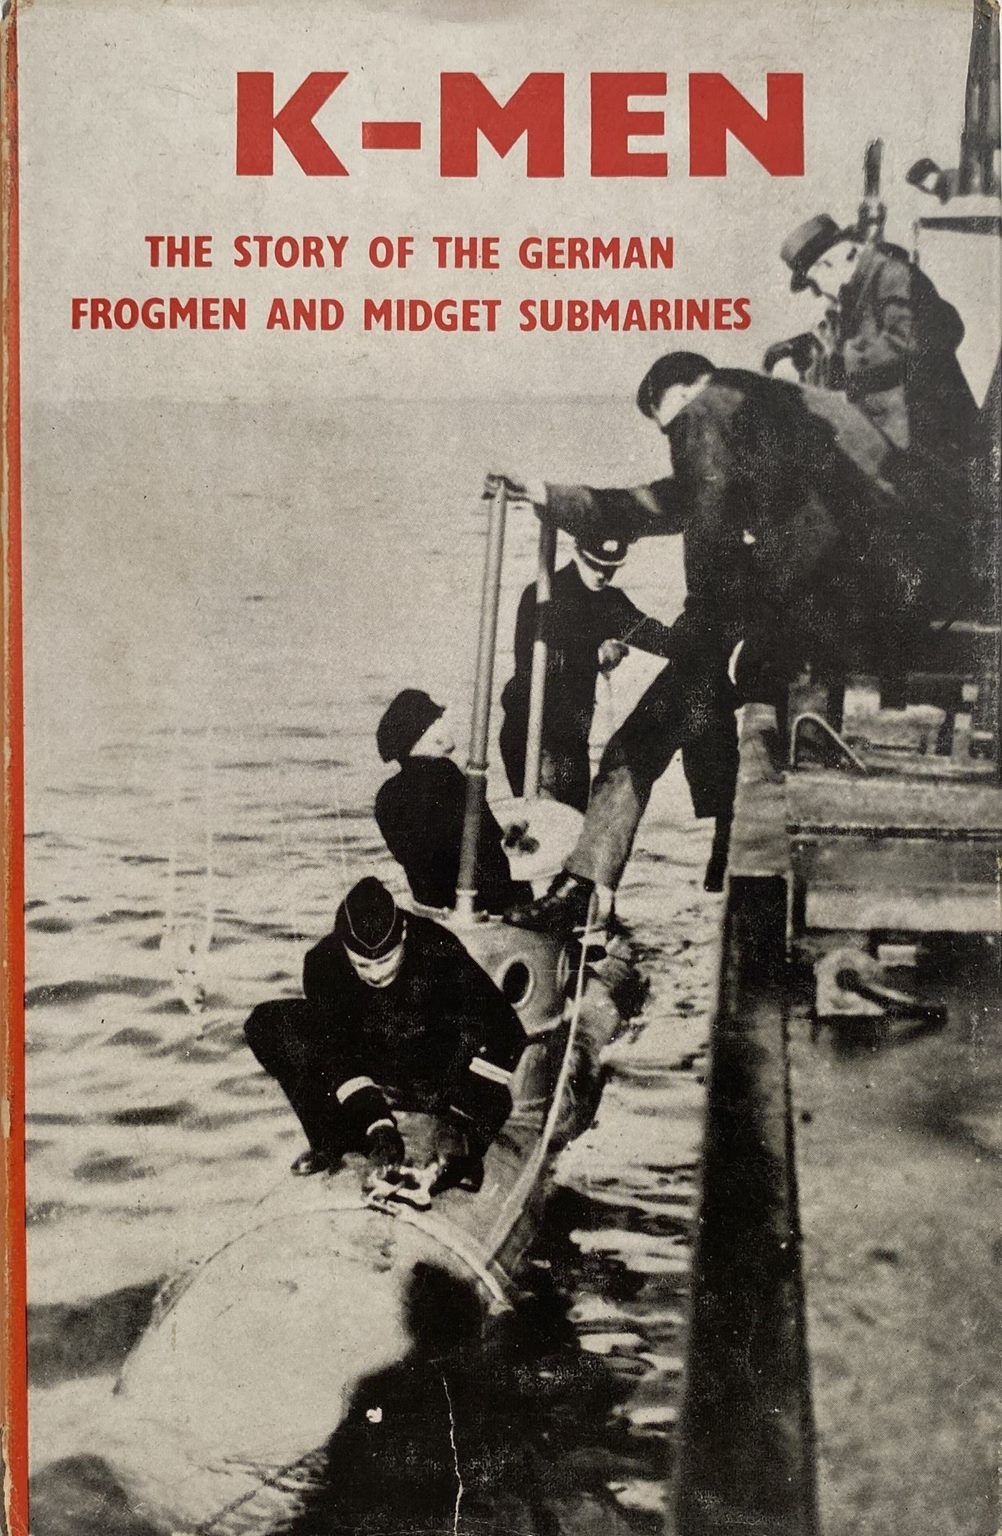 K-MEN: The Story of the German Frogmen and Midget Submarines